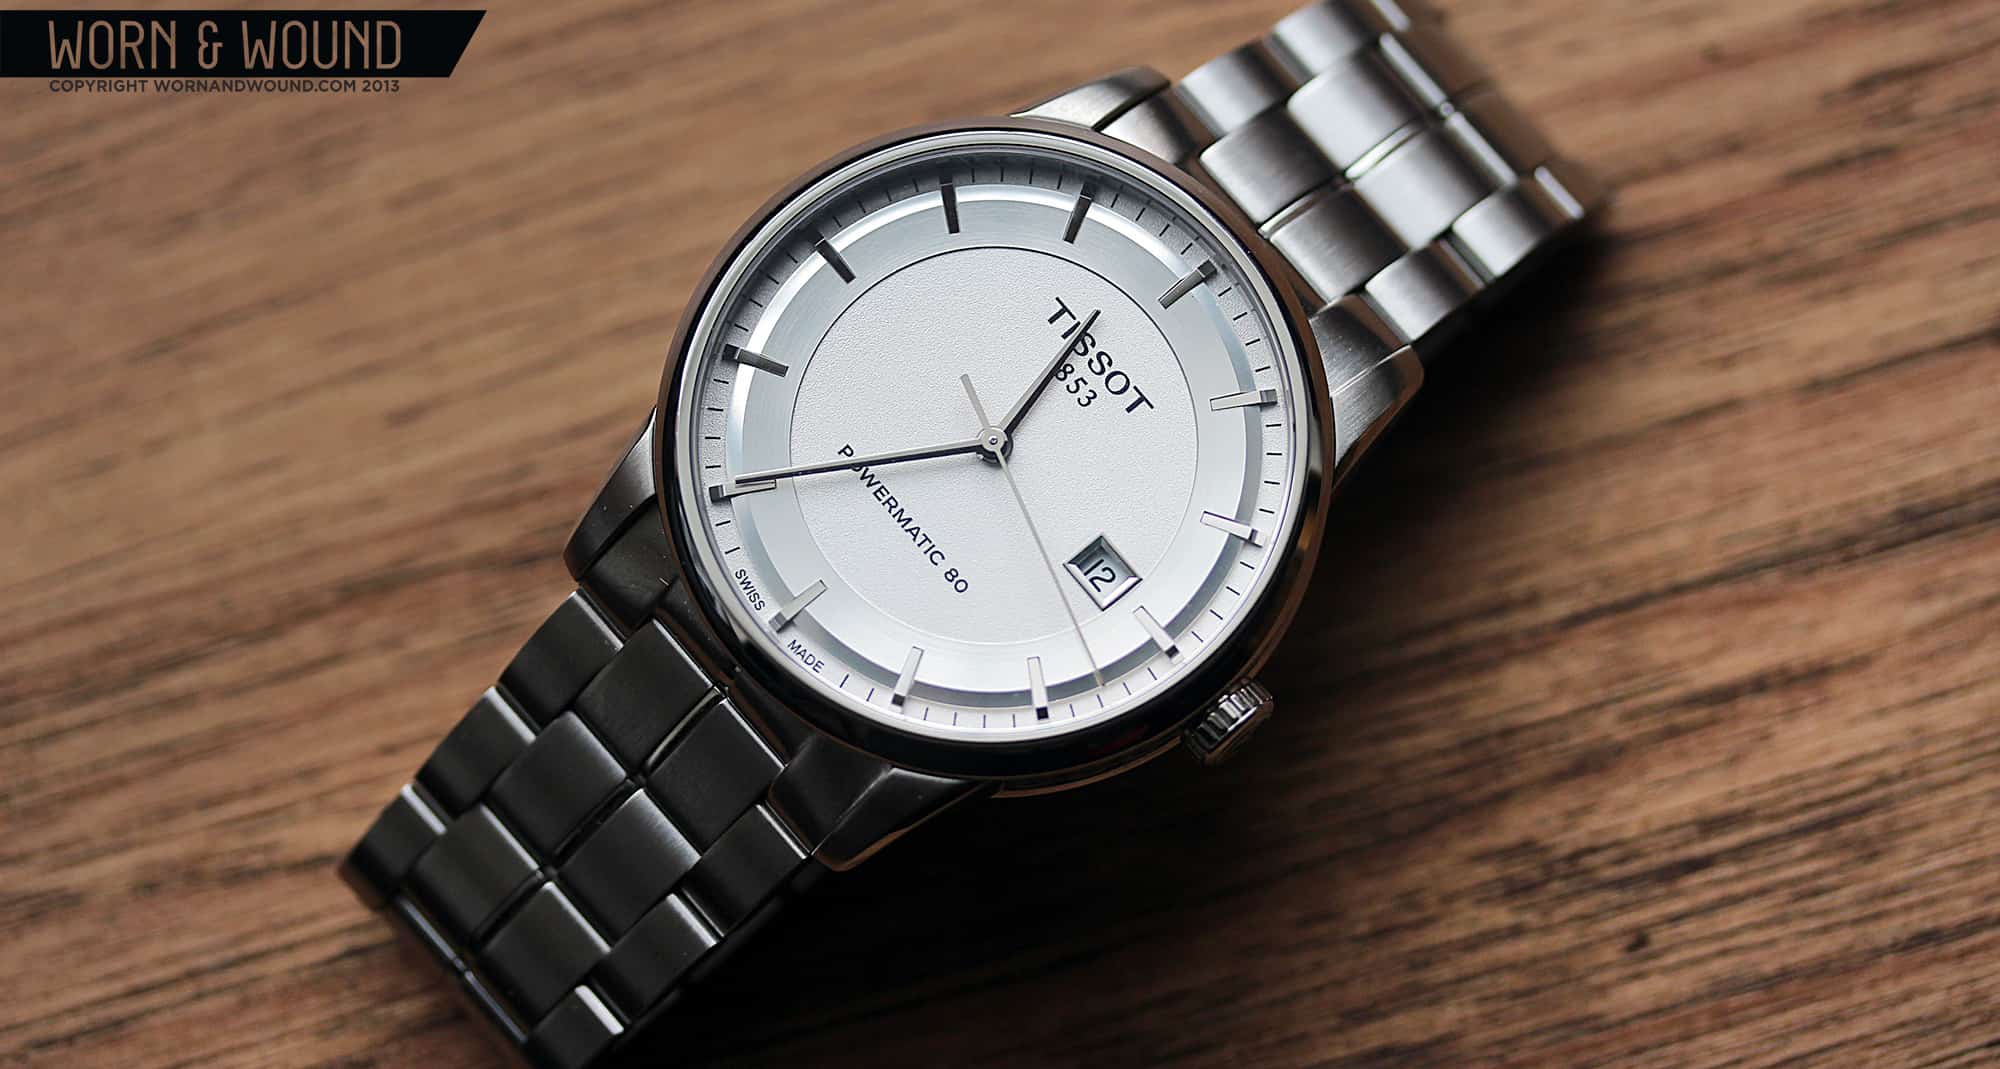 Tissot Luxury Automatic Powermatic 80 Review - Worn & Wound